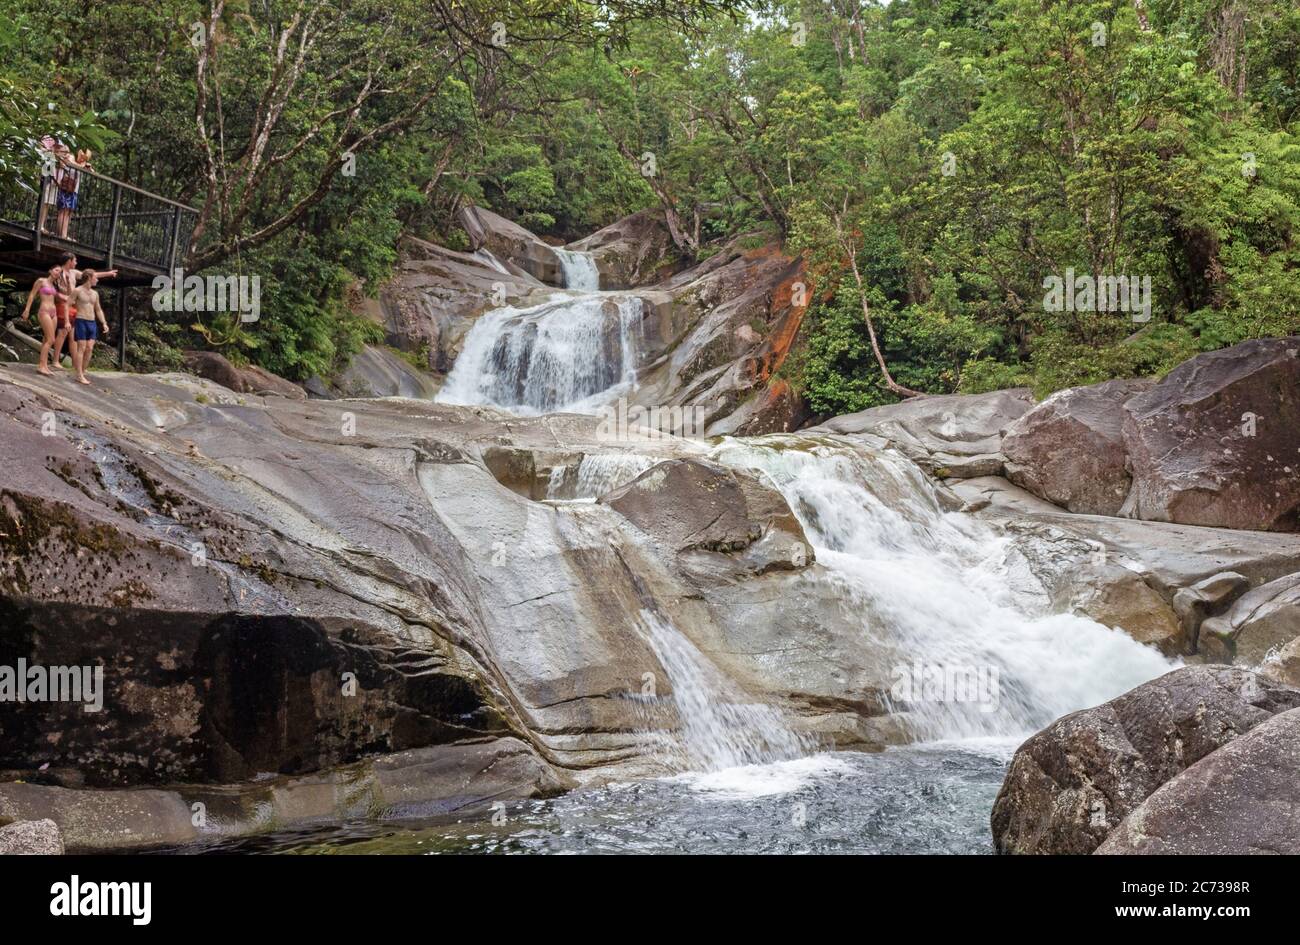 Josephine Falls is between Innisfail and Babinda and just off the Bruce Highway when heading up to the Cairns Region of Far North Queensland Australia Stock Photo